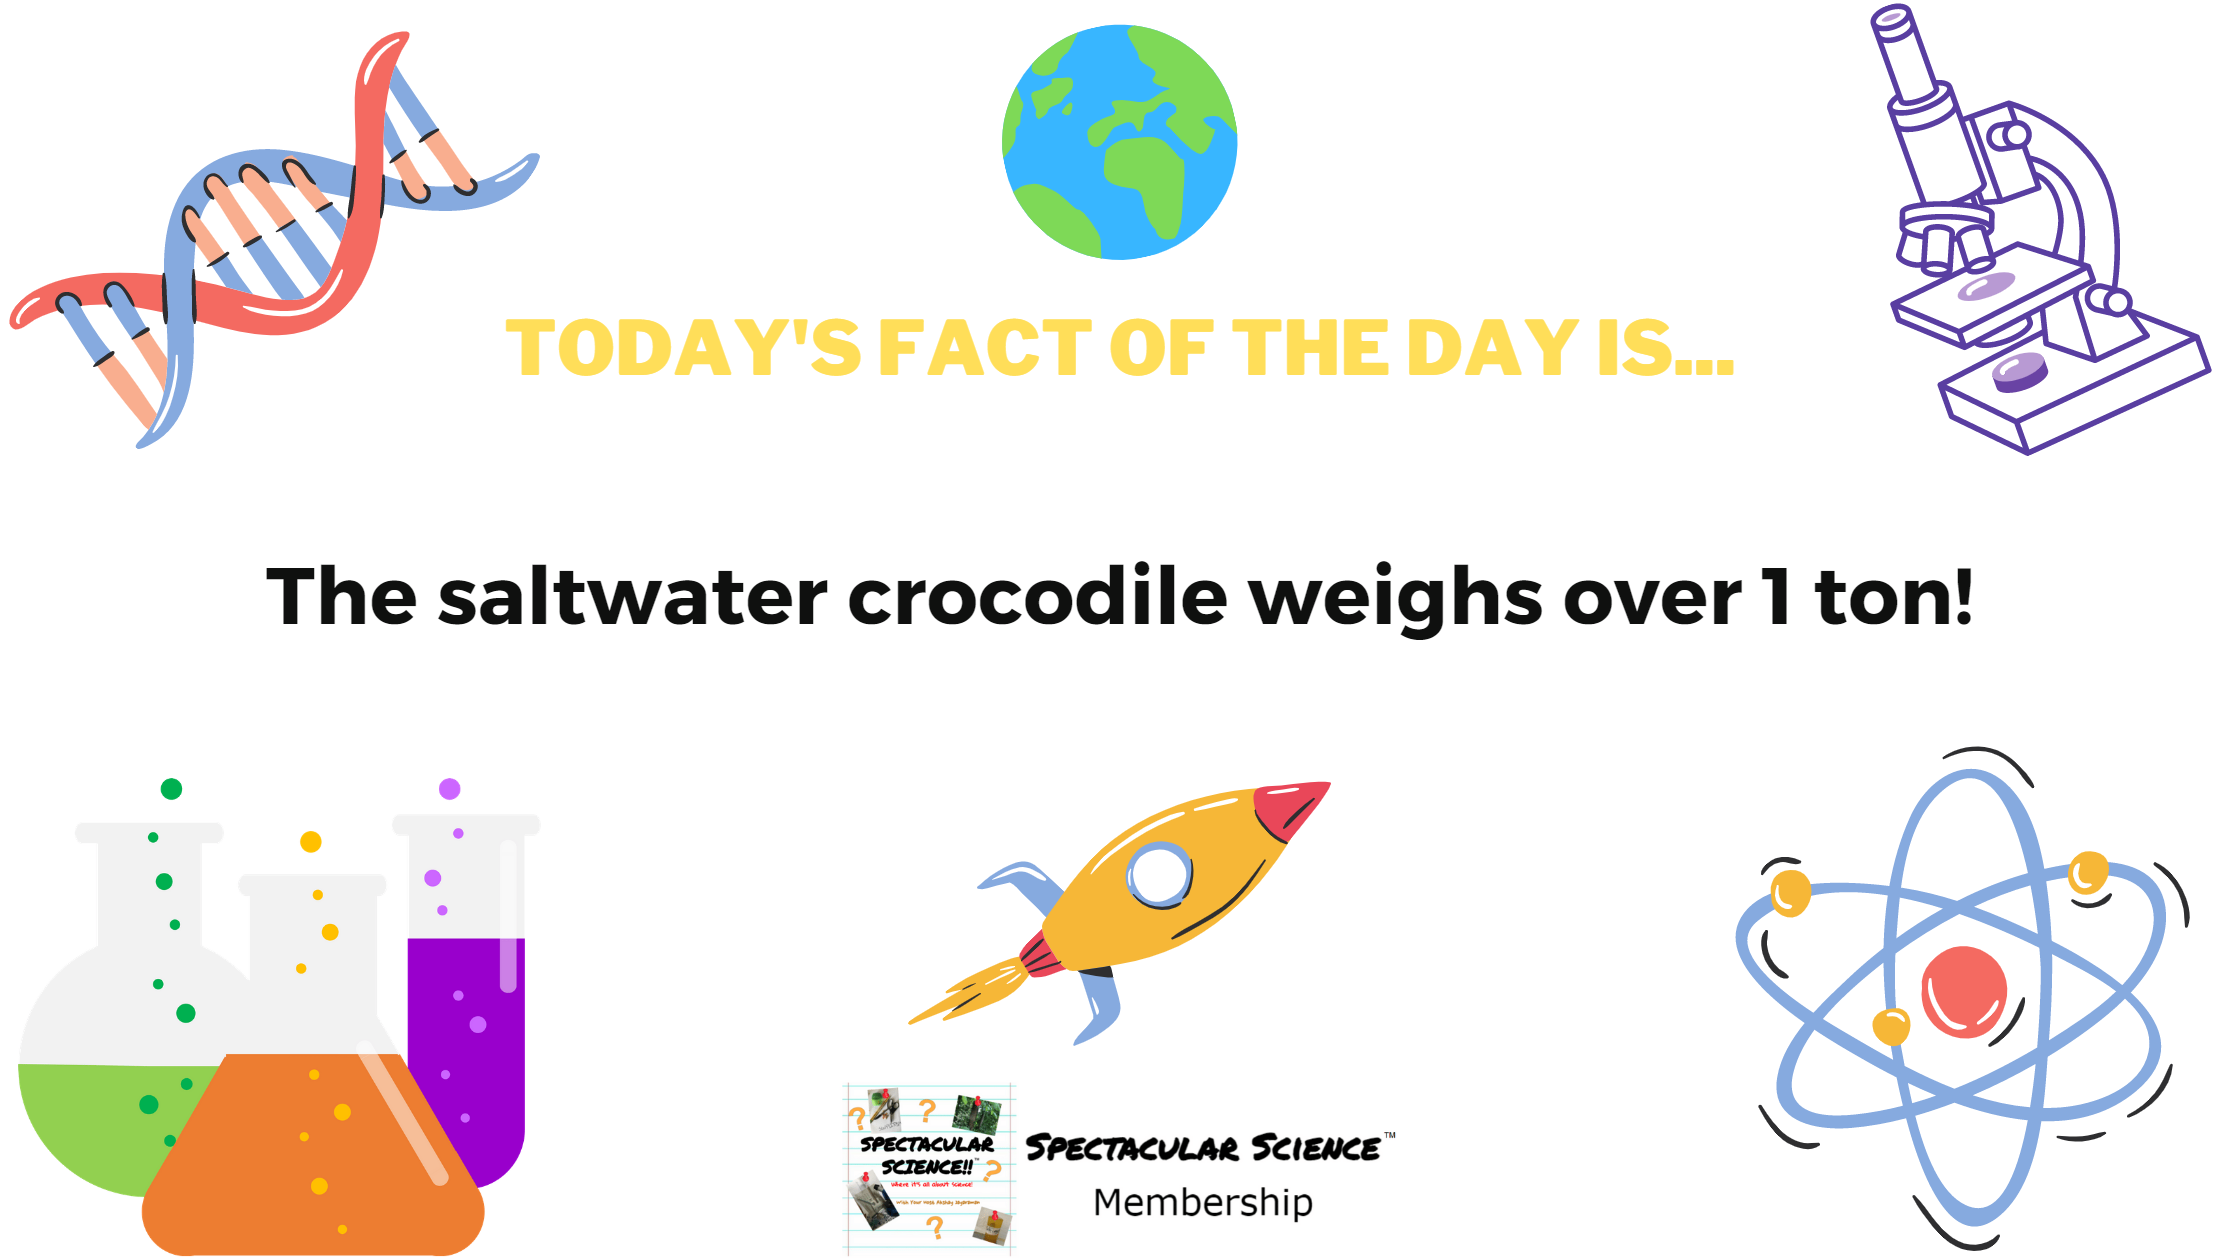 Fact of the Day Image March 17th